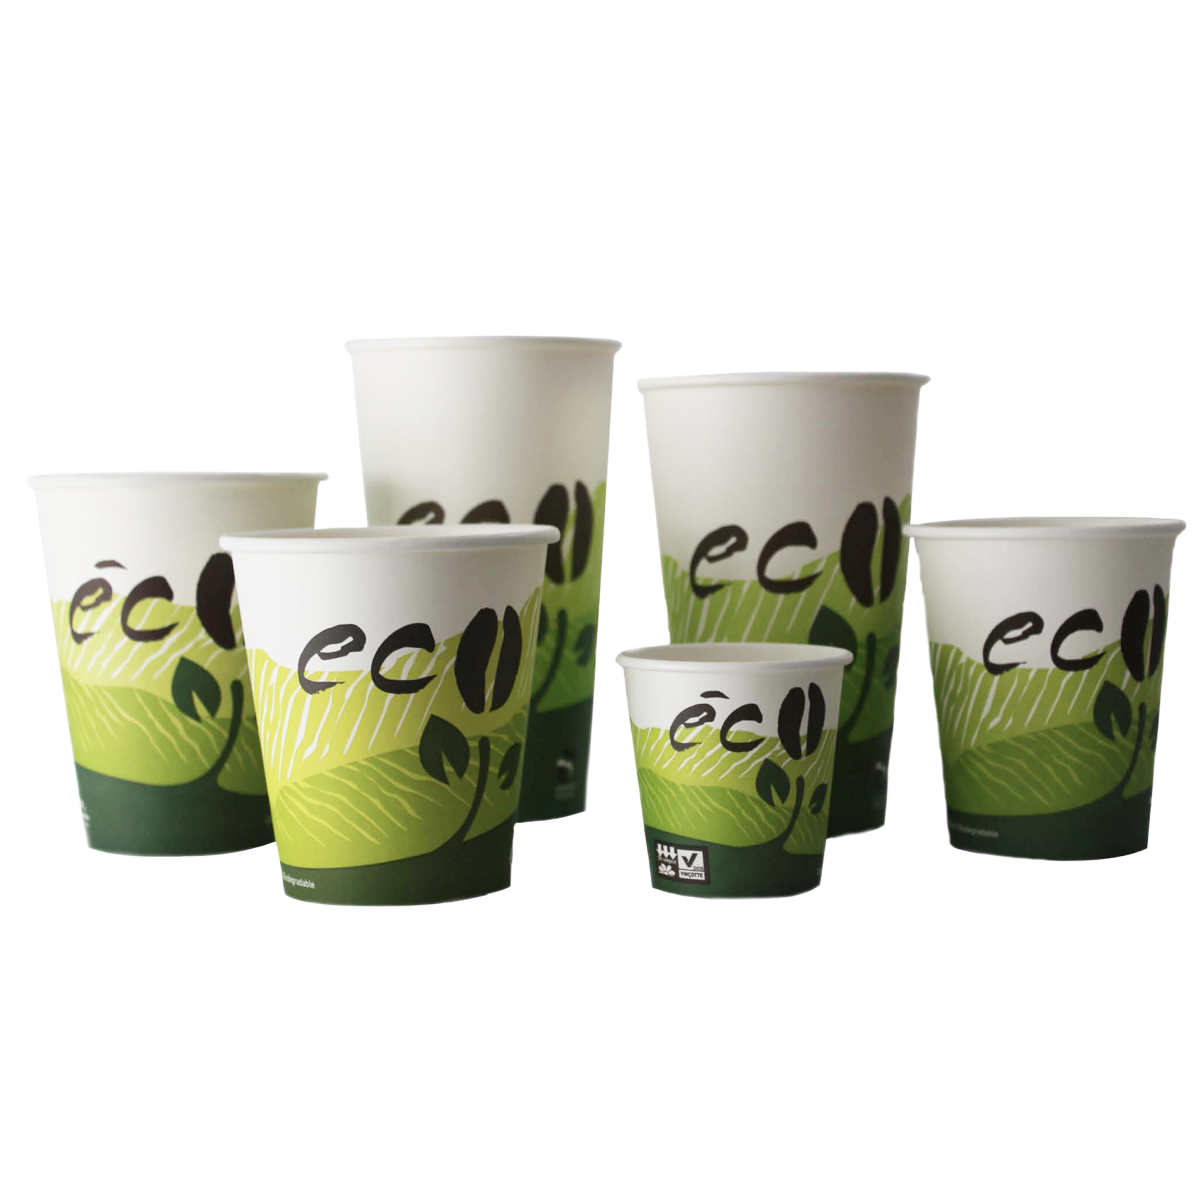 Green Cup - Our Review - Eatability